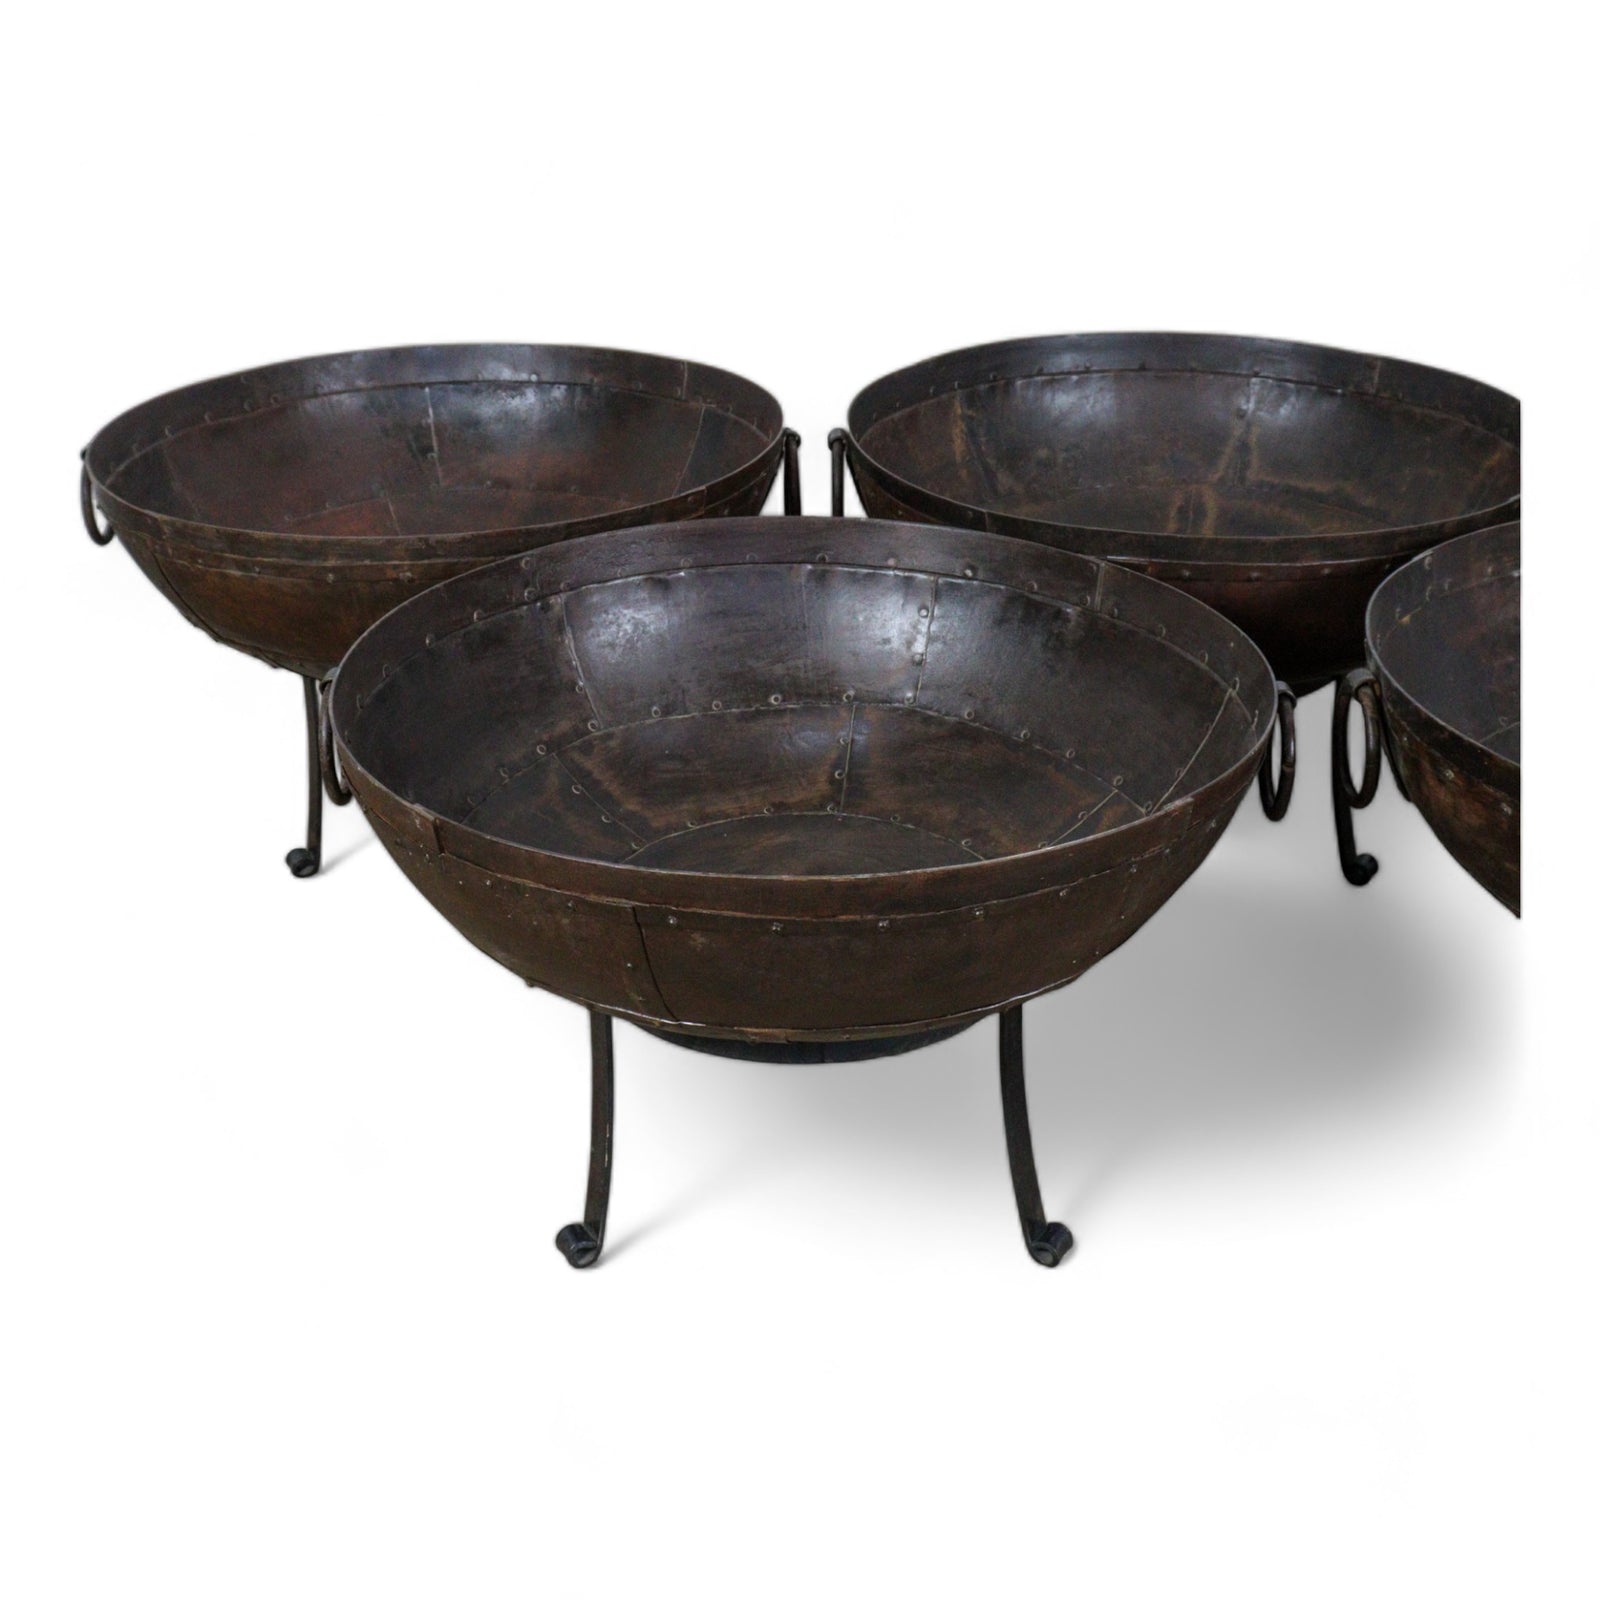 MILL-1322/1 Large Kadai with Stand 80 cm